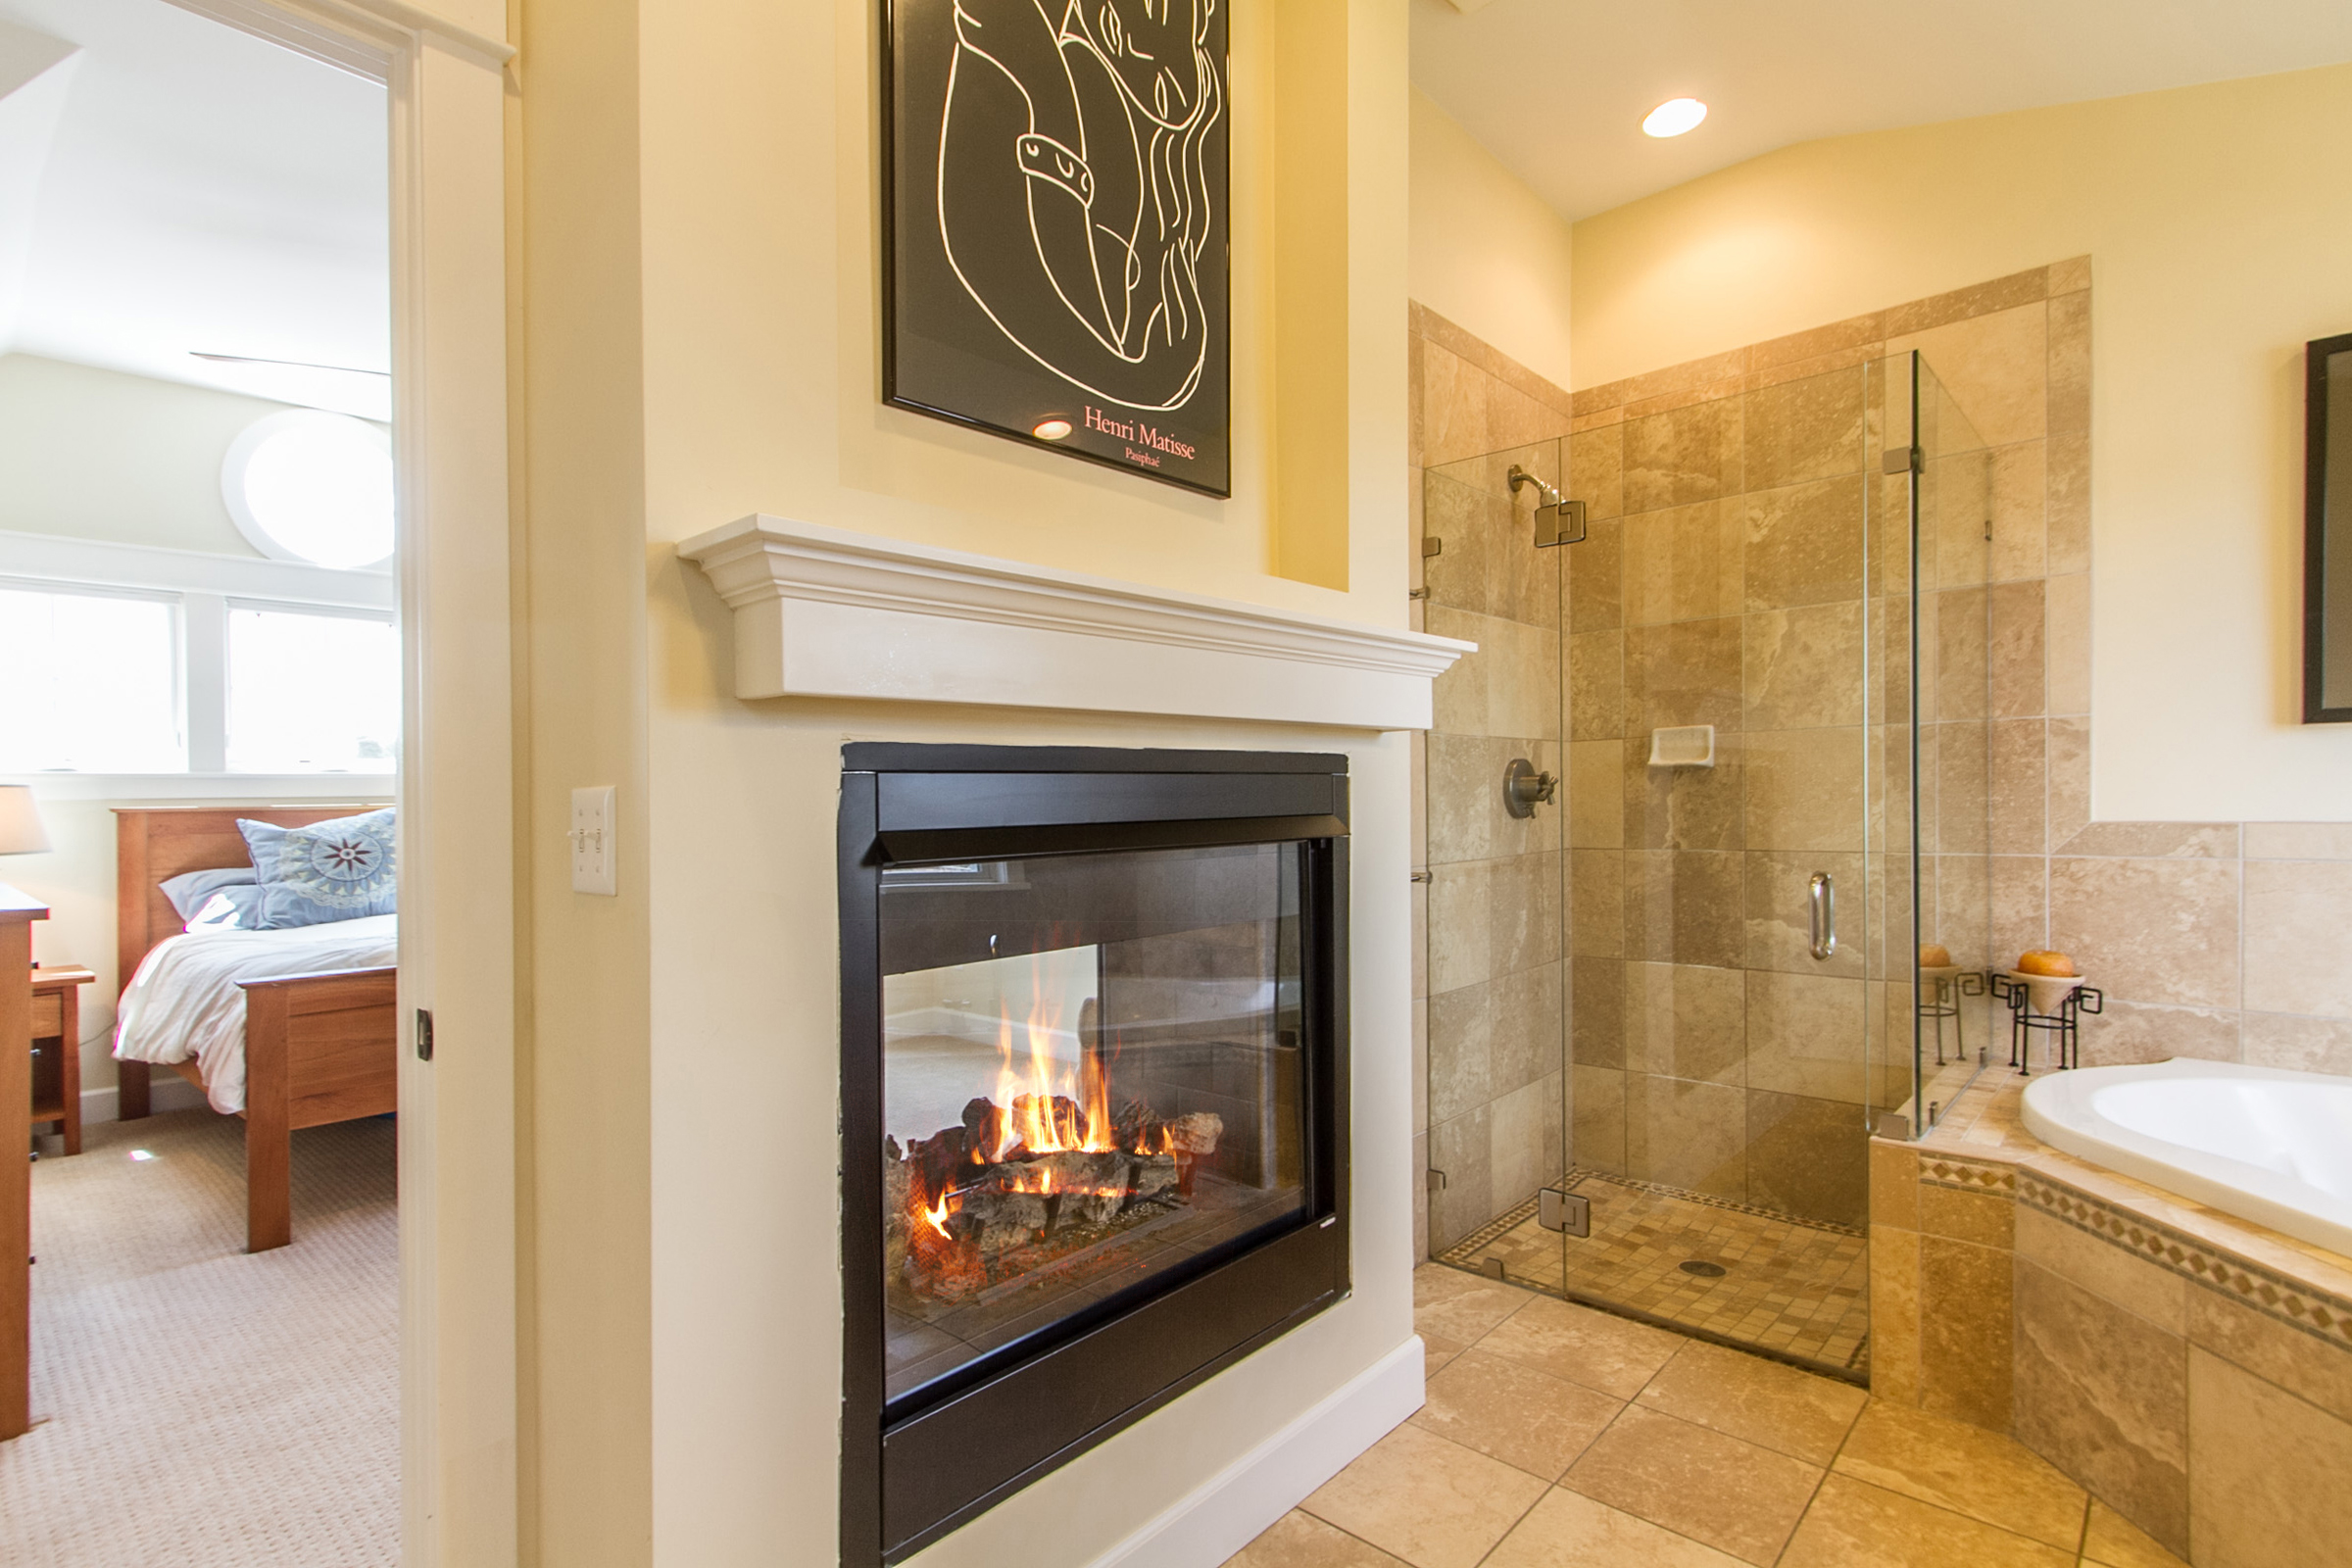 1246098_Master-Suite-Bath-Shares-Fireplace-With-Bedroom_high.jpg